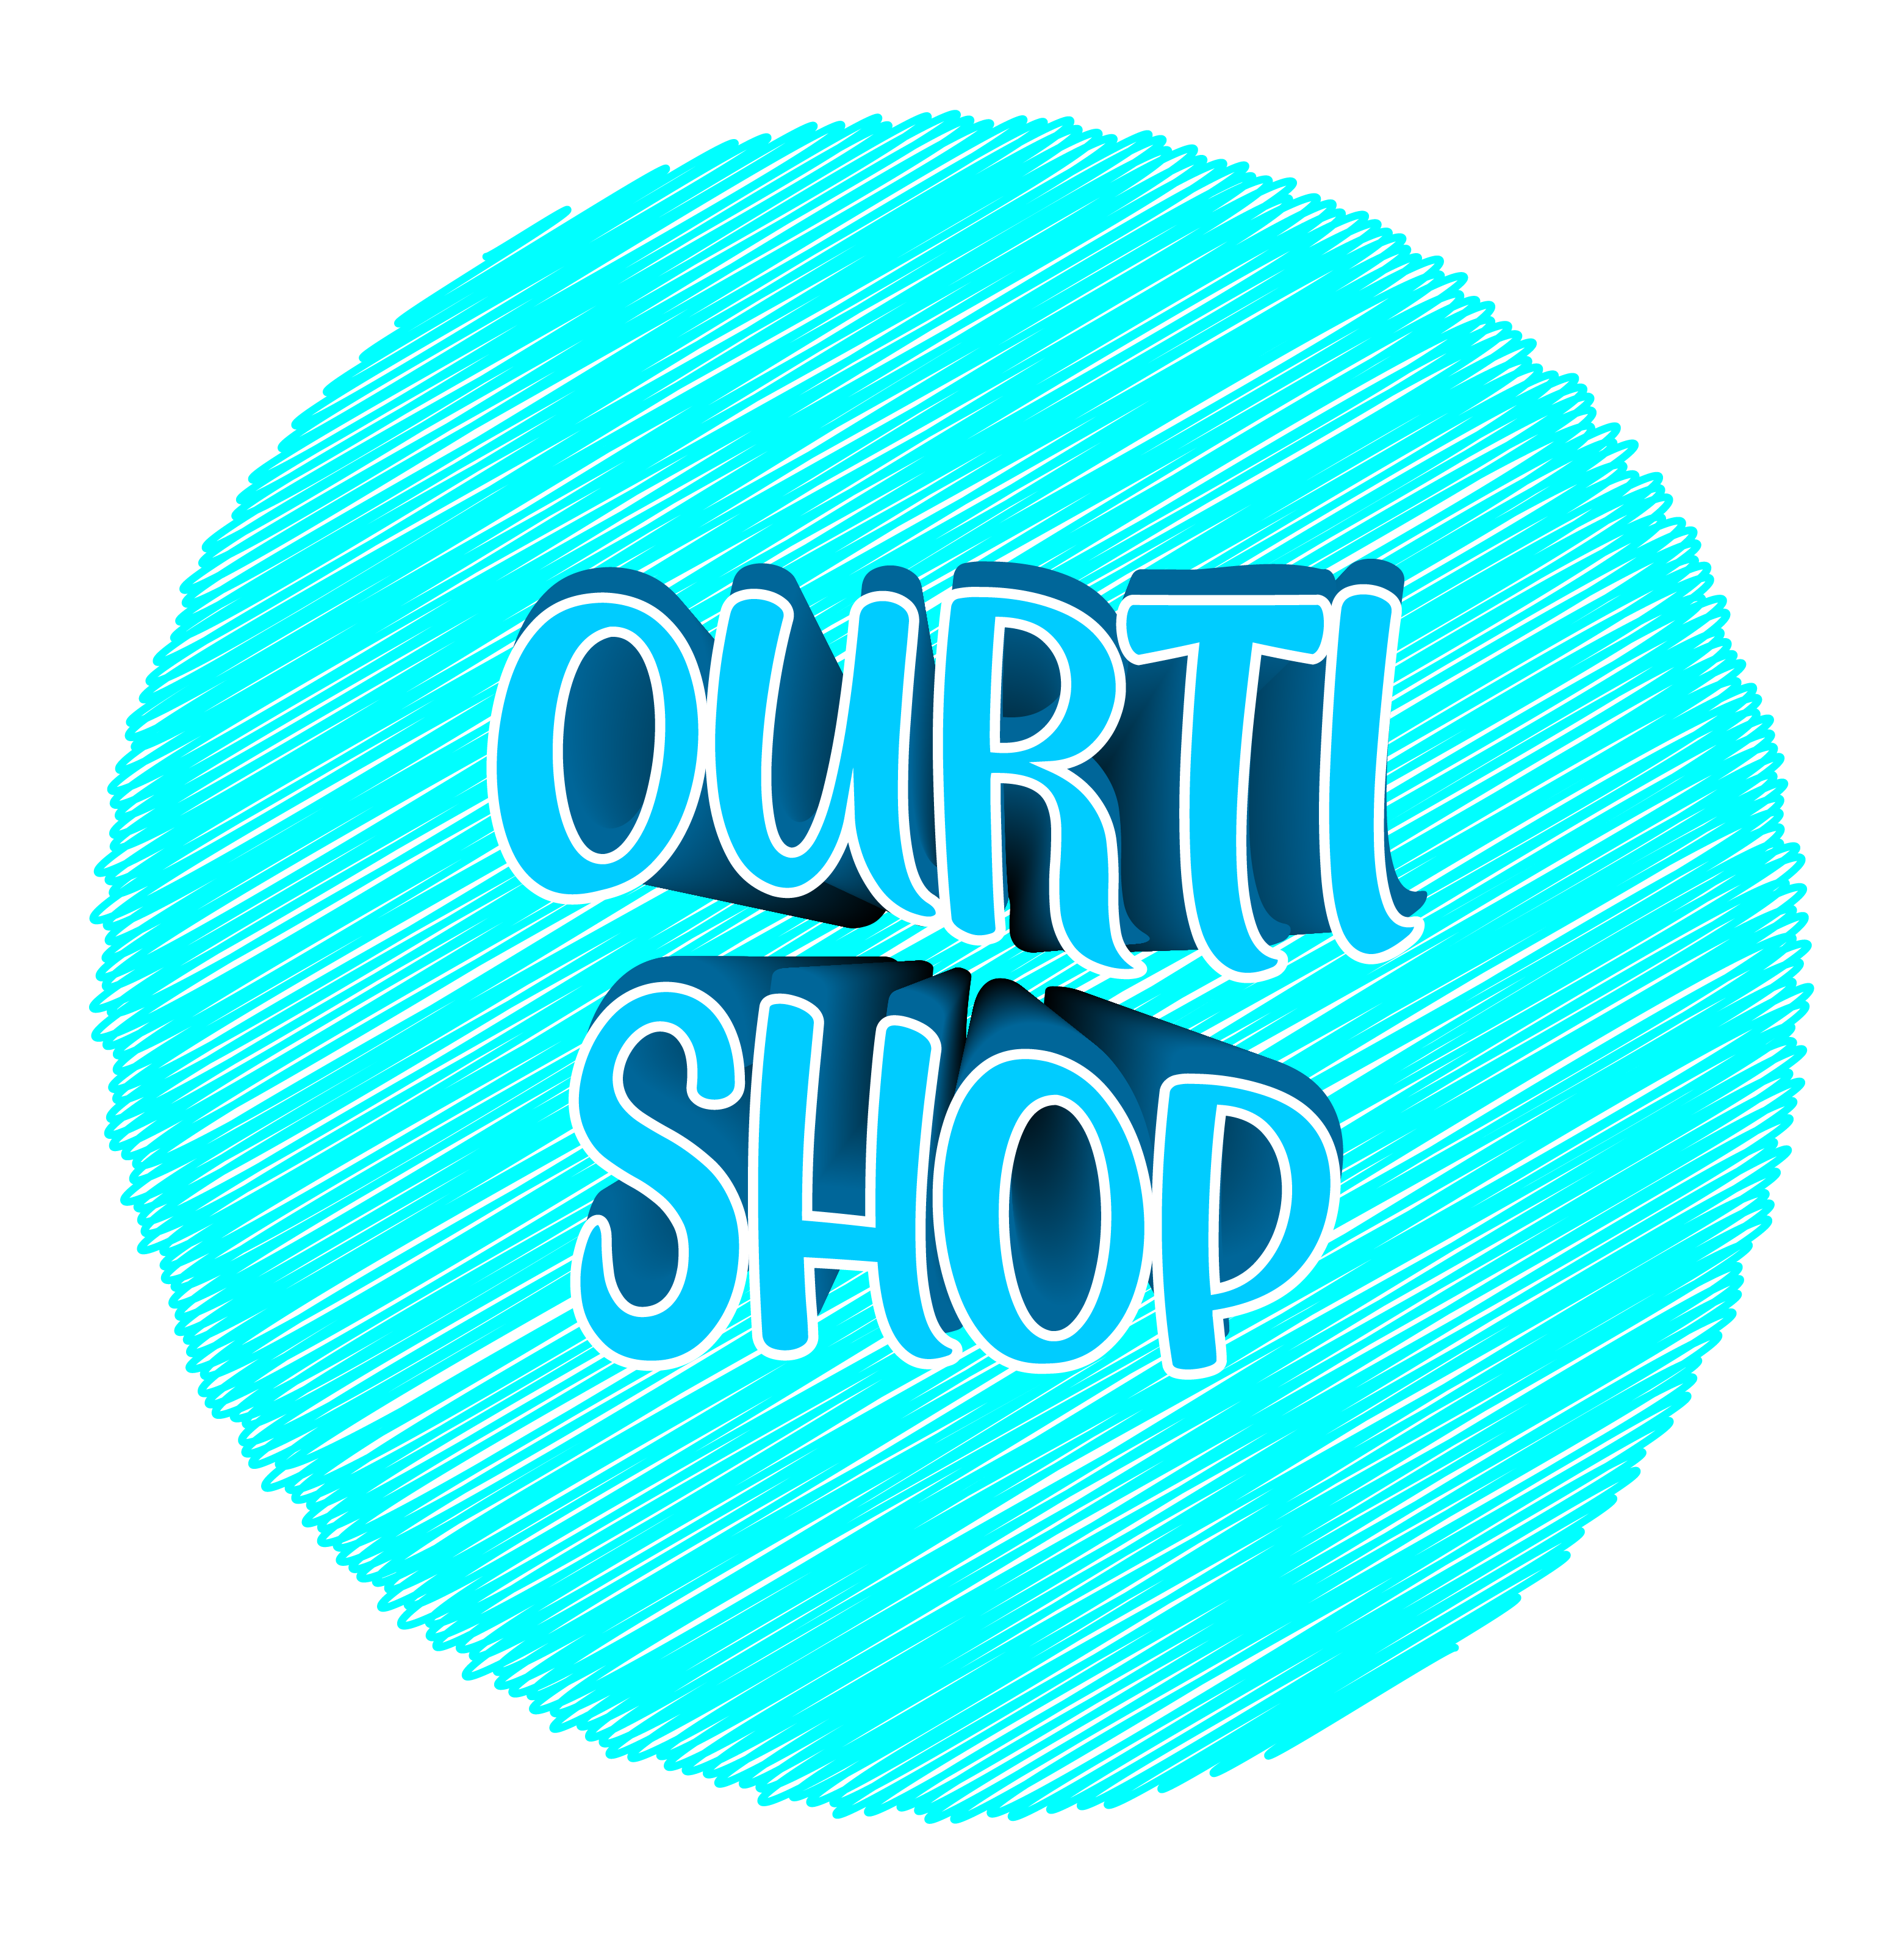 Ourti Shop